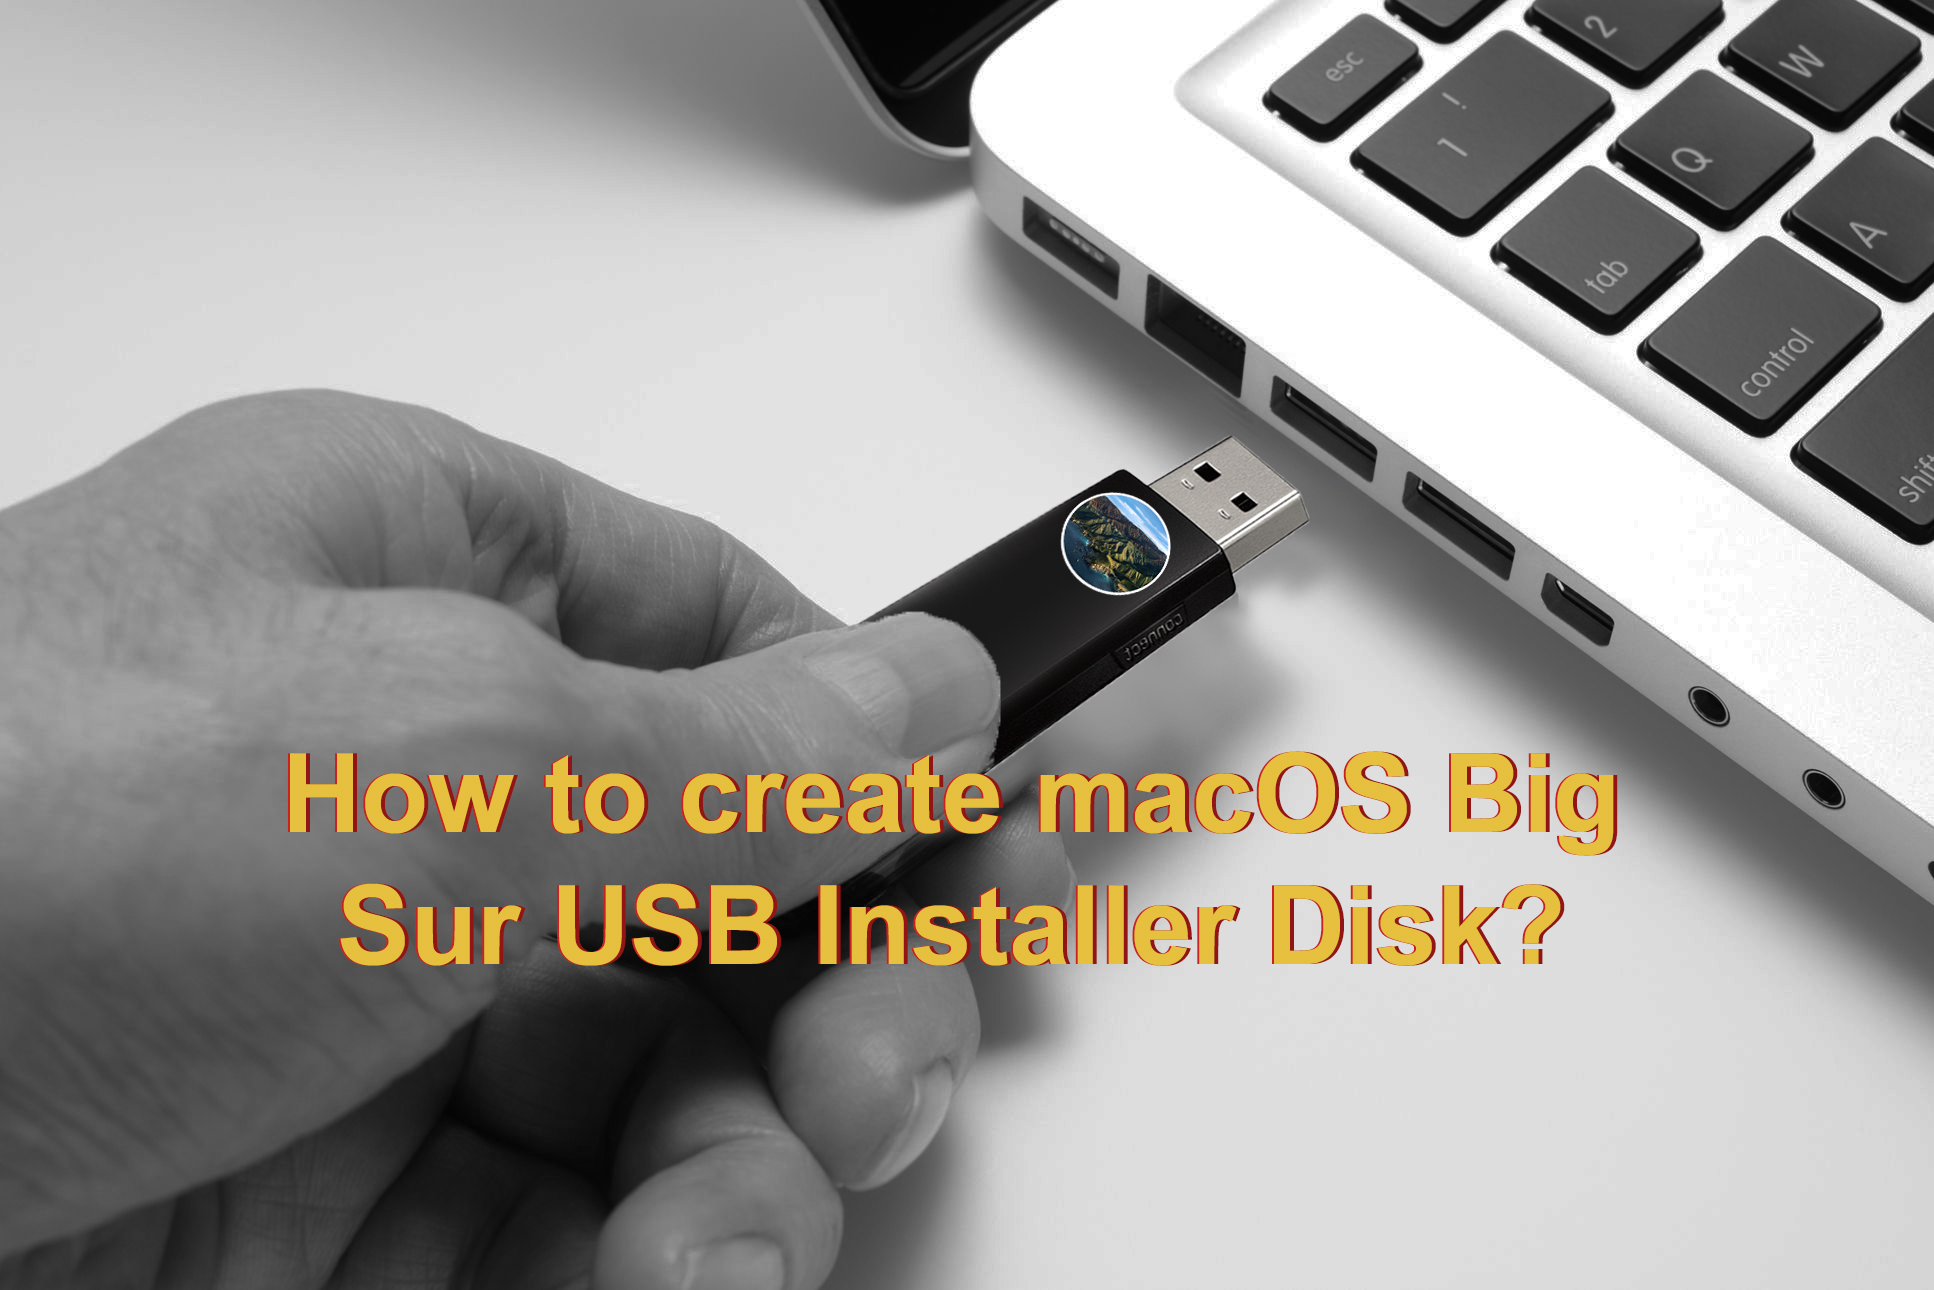 How to create macOS Big Sur USB Installer Disk?